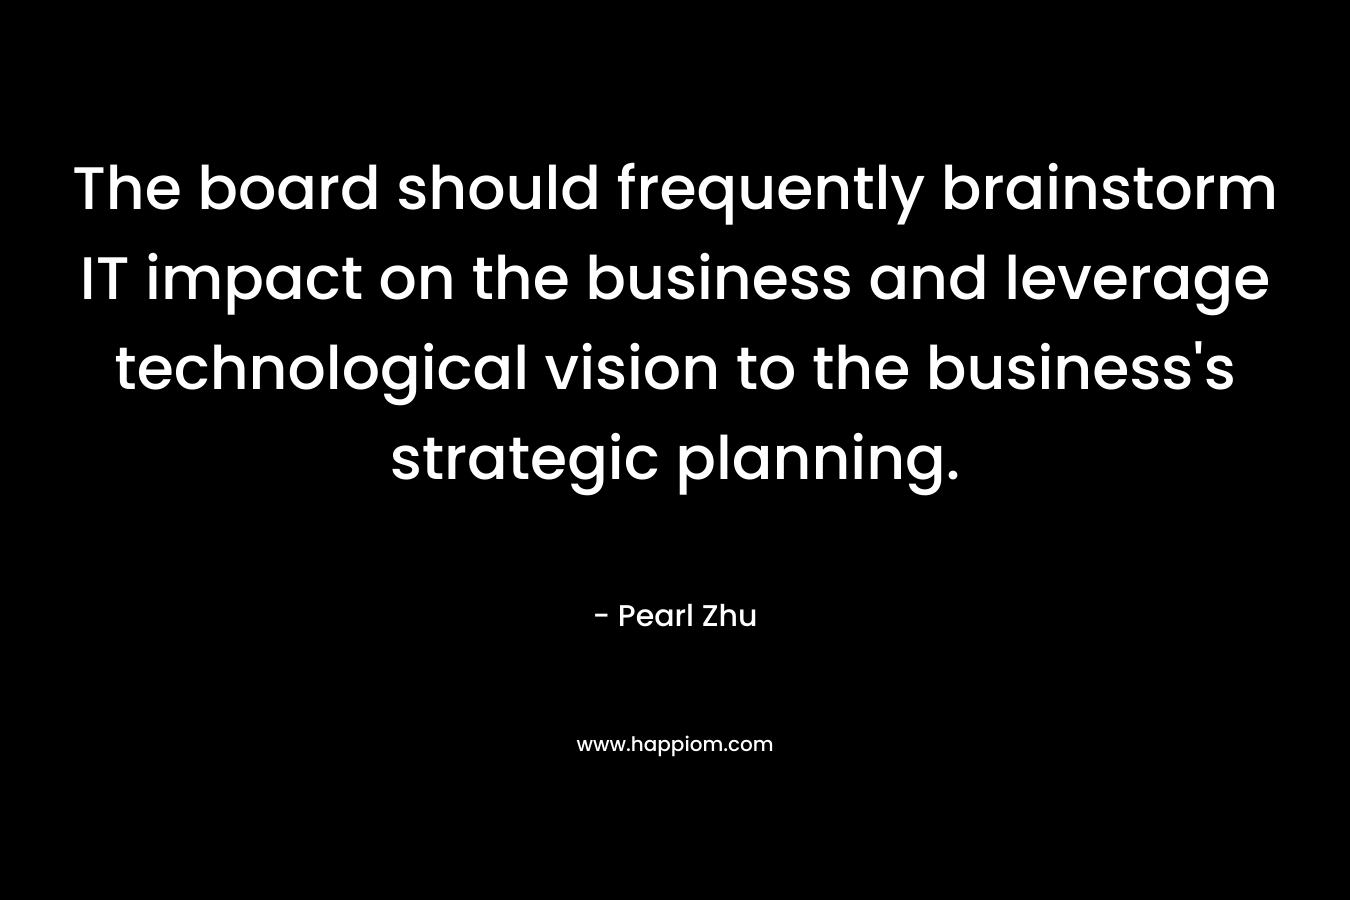 The board should frequently brainstorm IT impact on the business and leverage technological vision to the business’s strategic planning. – Pearl Zhu